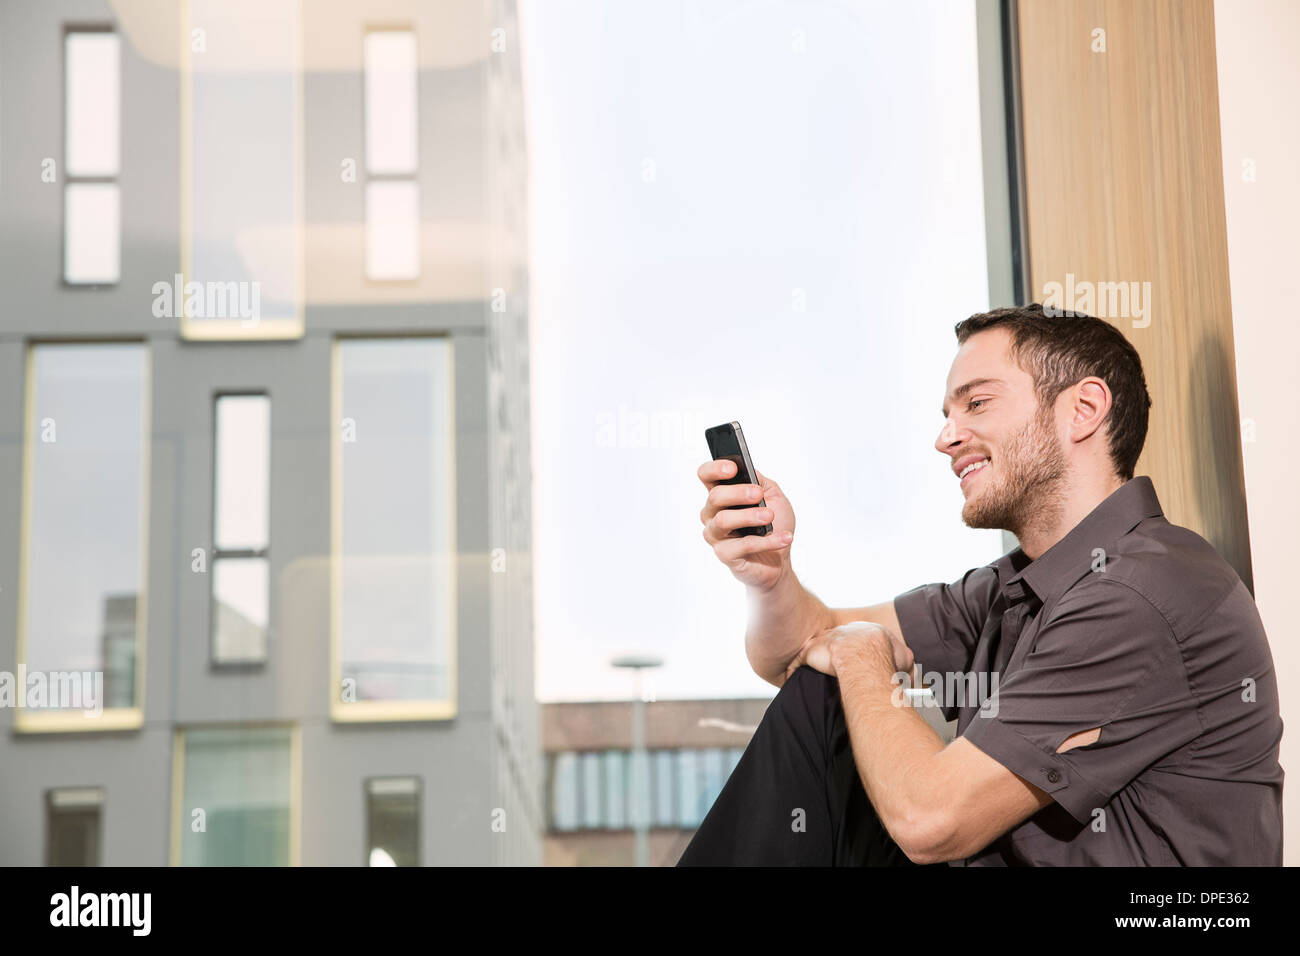 Businessman sitting on windowsill using smartphone Banque D'Images